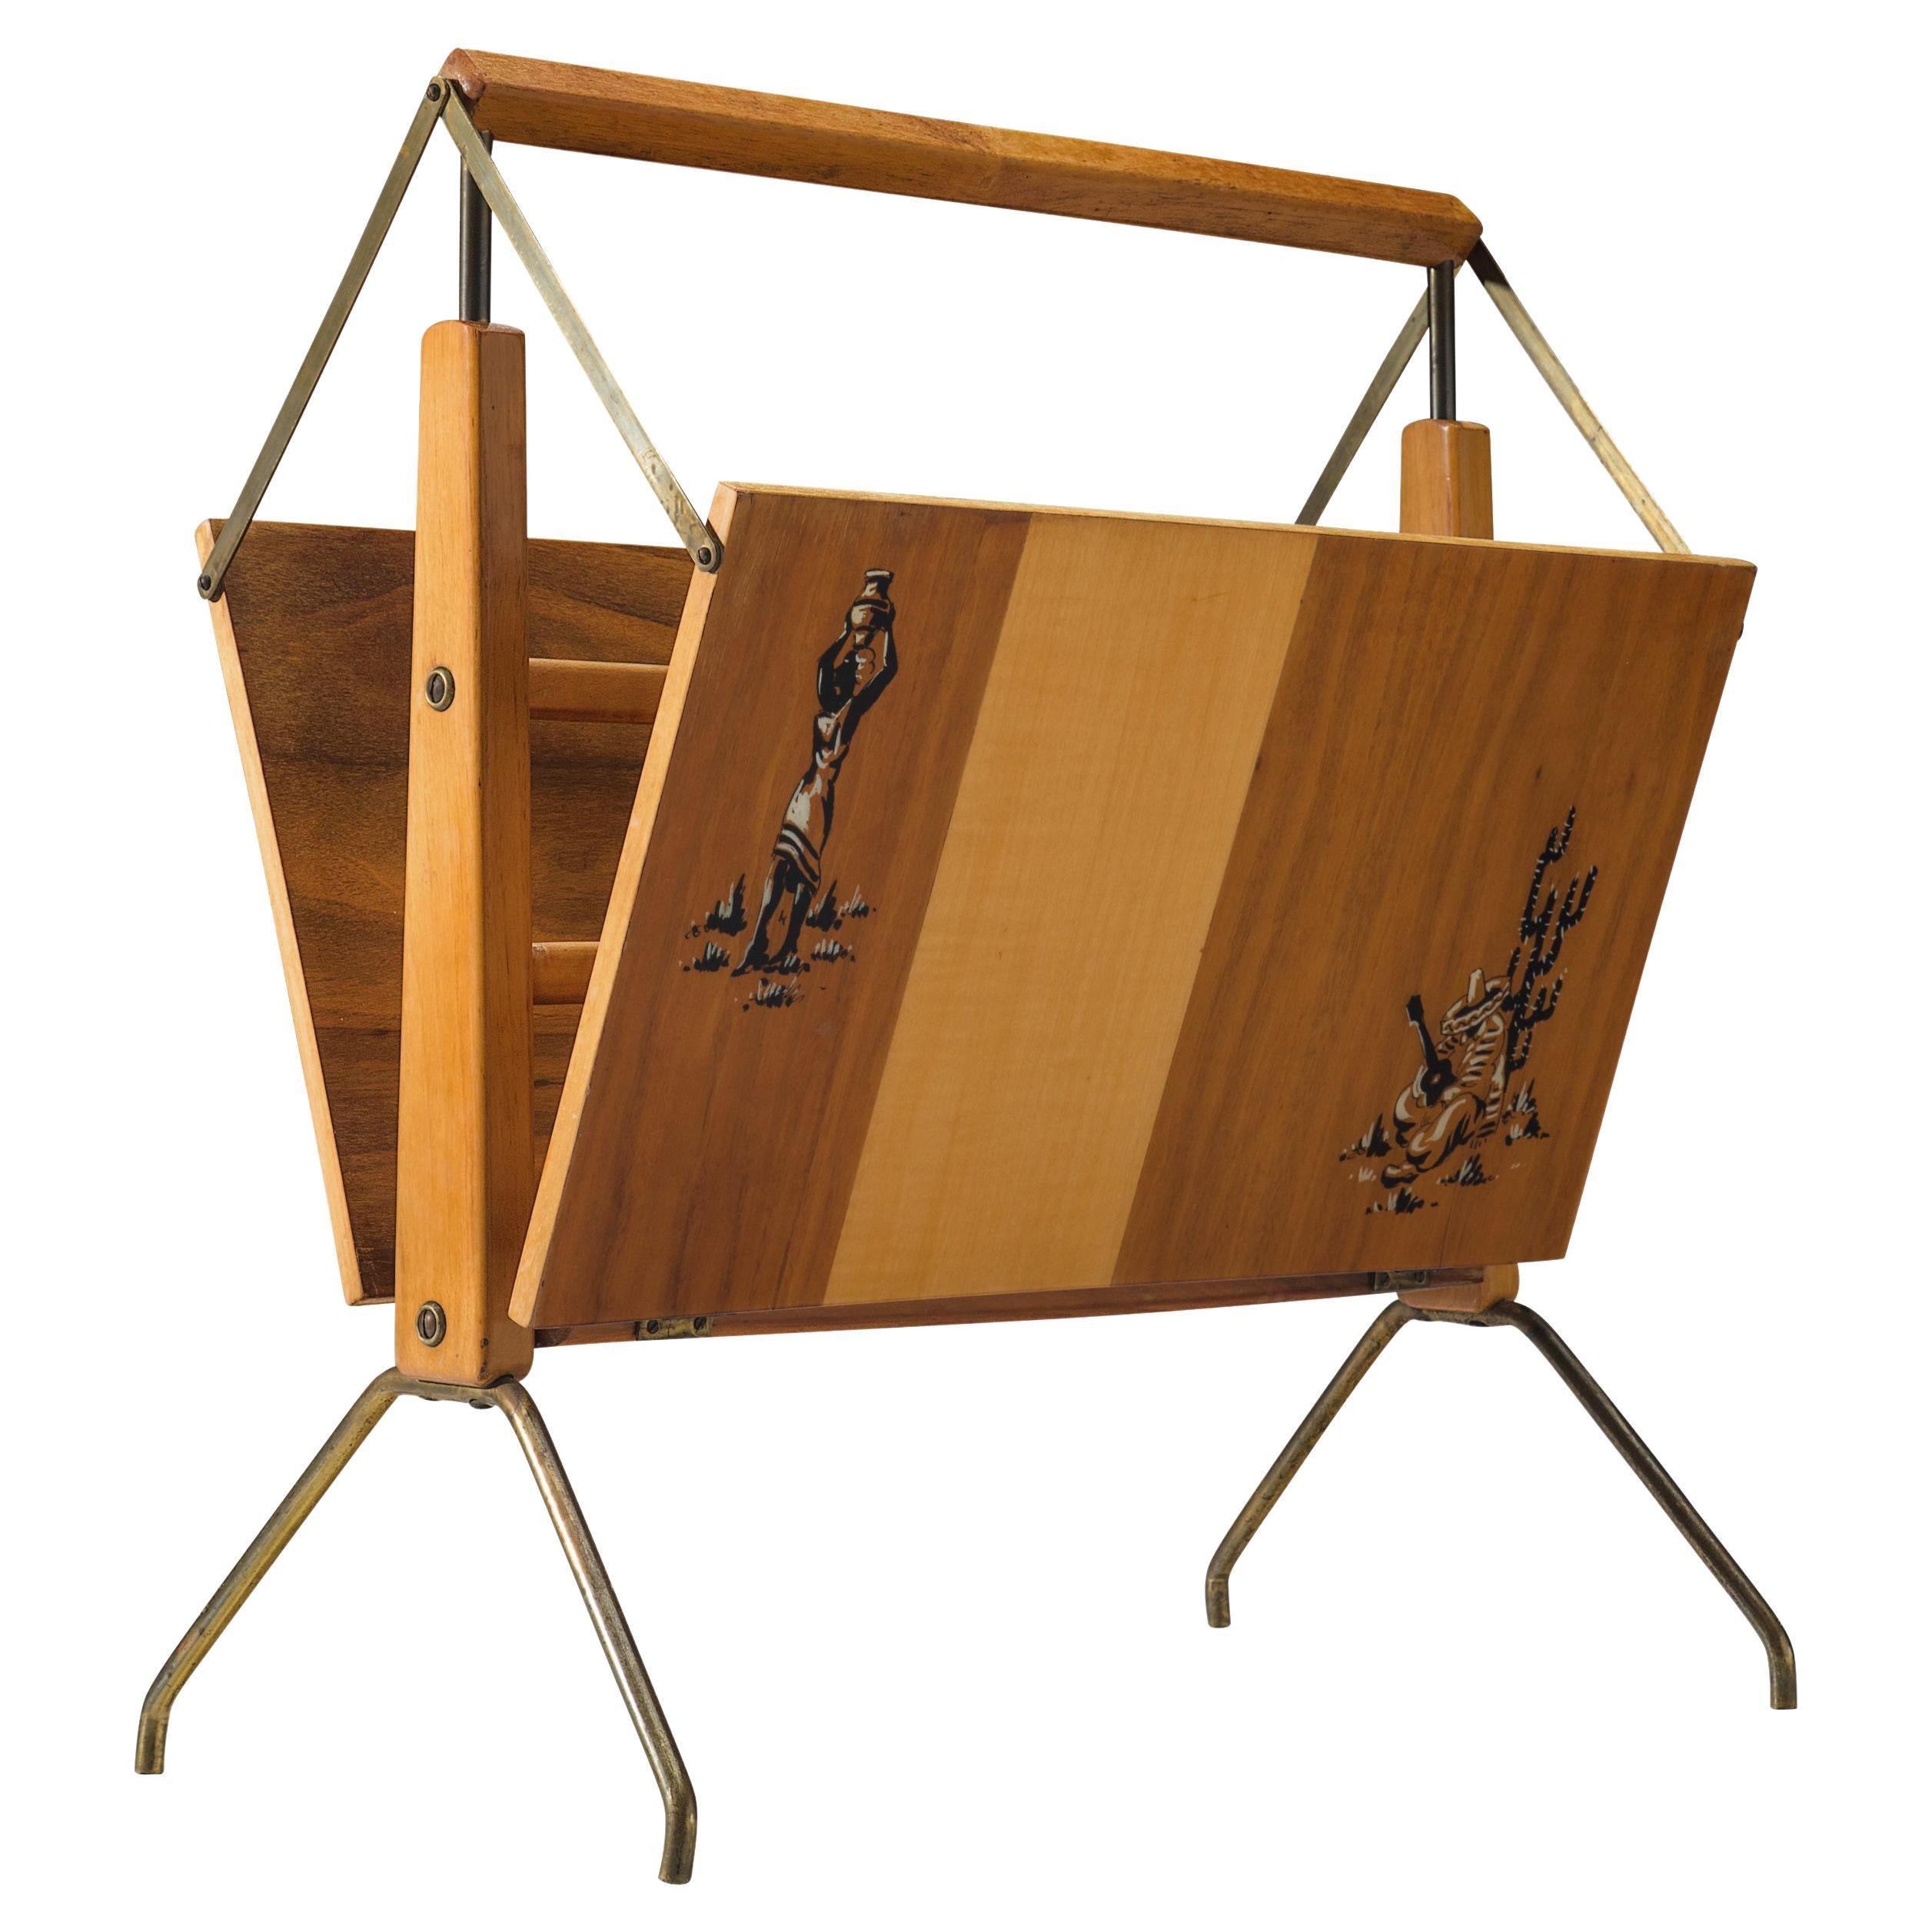 Italian Foldable Magazine Rack in Walnut and Brass with Illustrations  For Sale